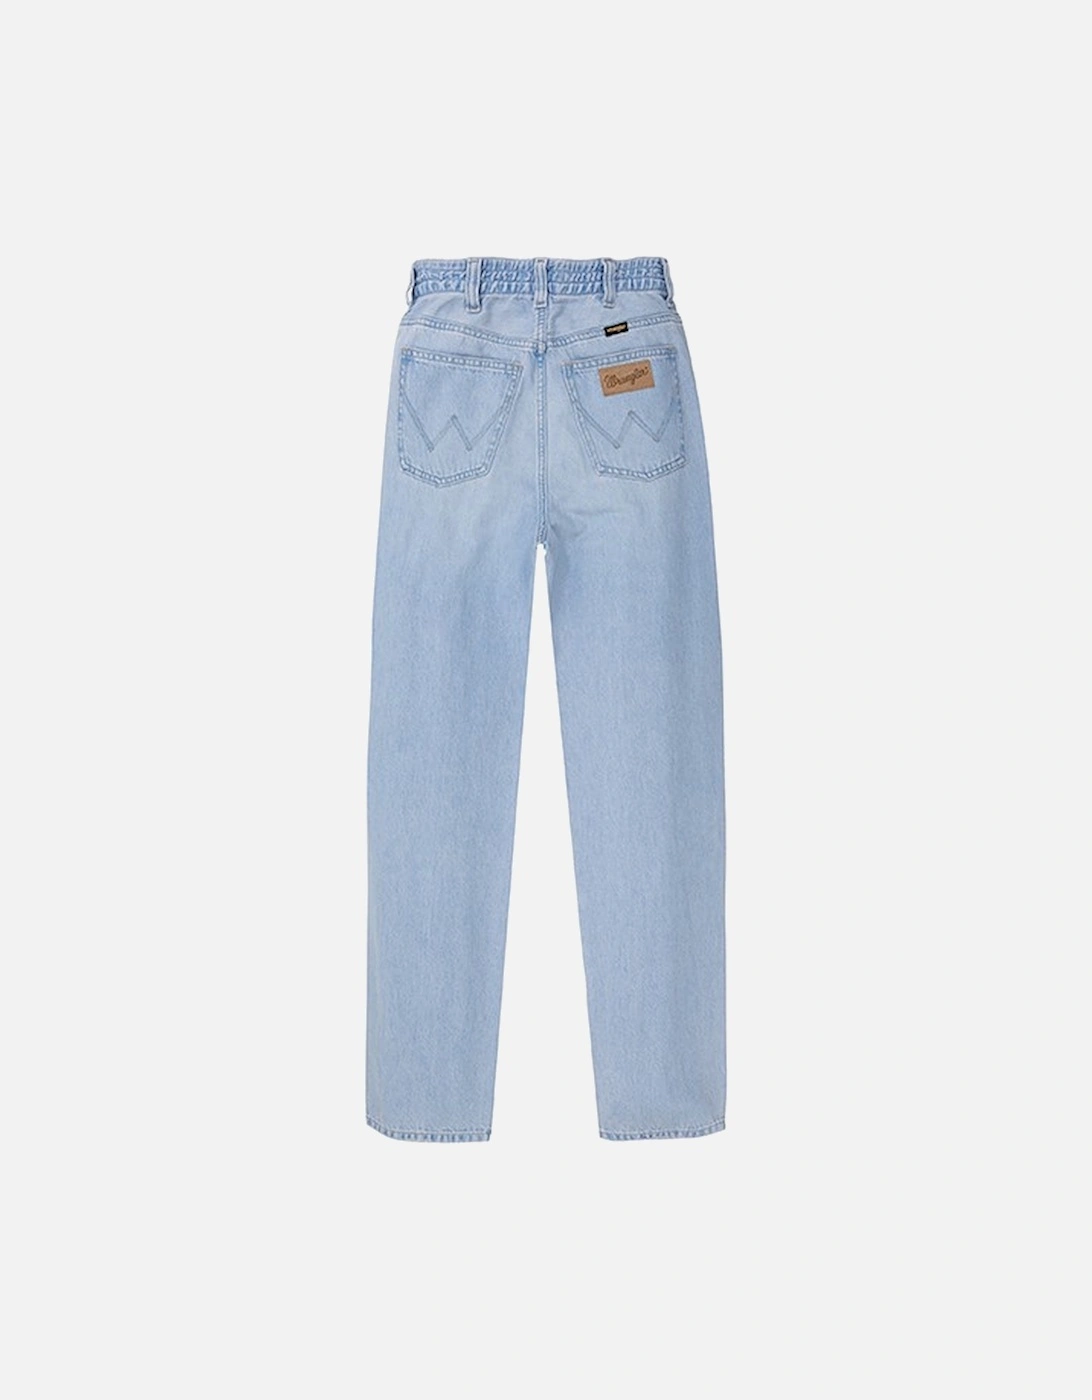 Women's Comfy Mom Jeans Ice Ice Baby